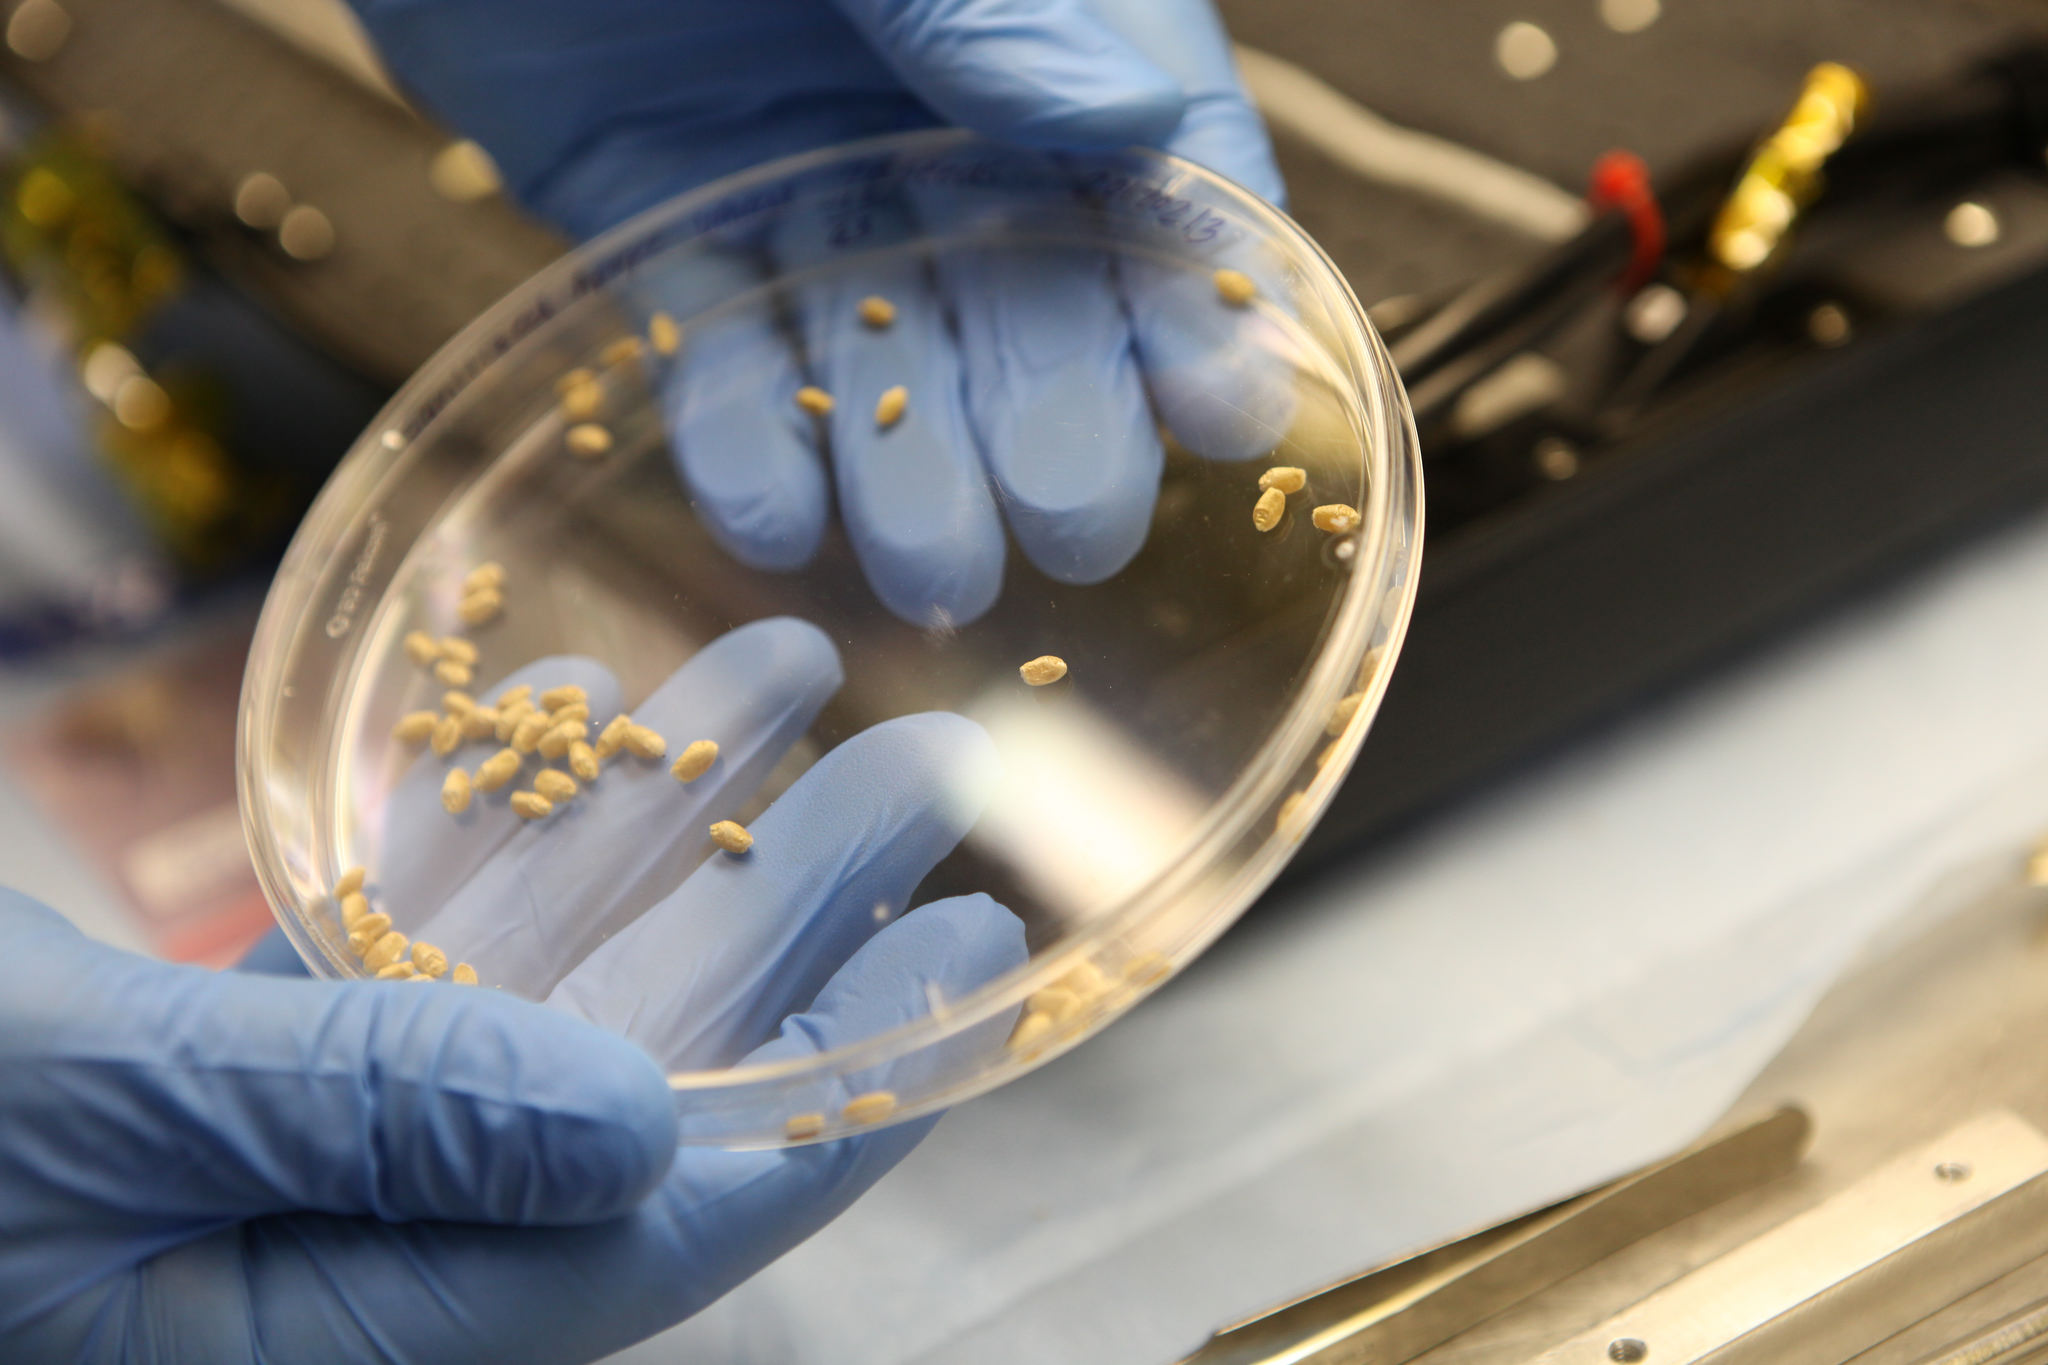 Scientists prepare Apogee wheat seeds for the science carrier, or base, of the Advanced Plant Habitat (APH).